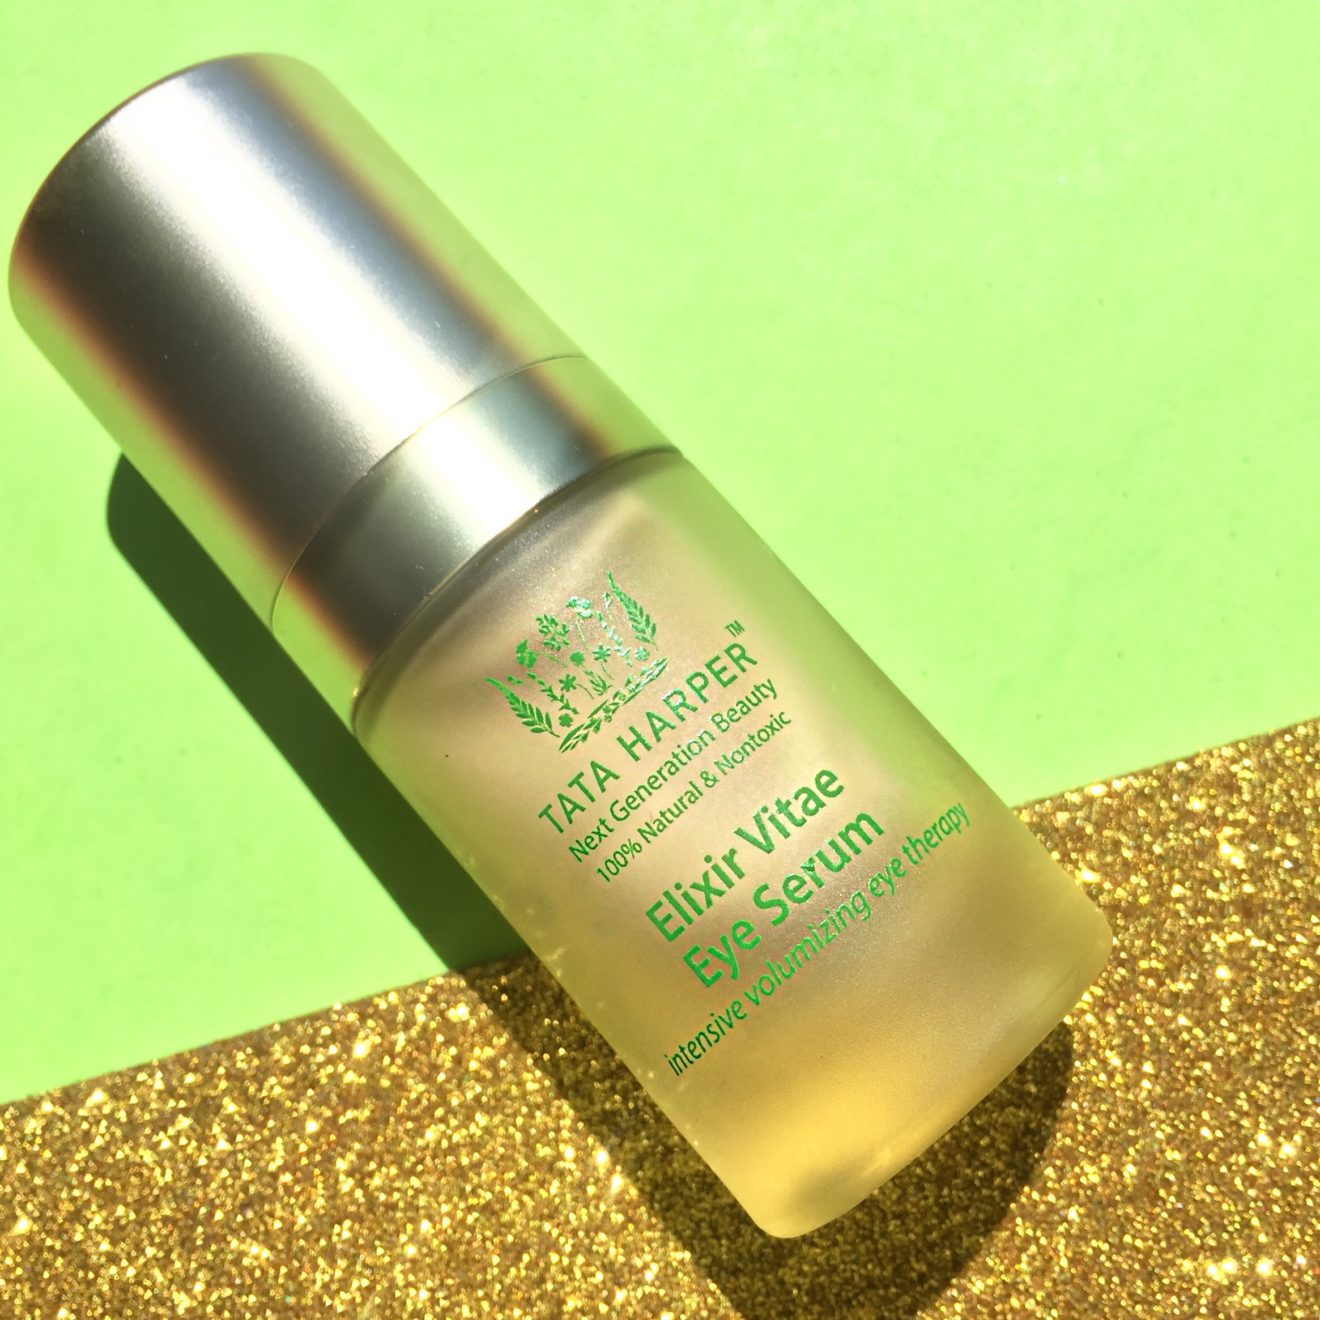 Going Green With Tata Harper Elixir Vitae: The Future of Topical Treatment Skincare